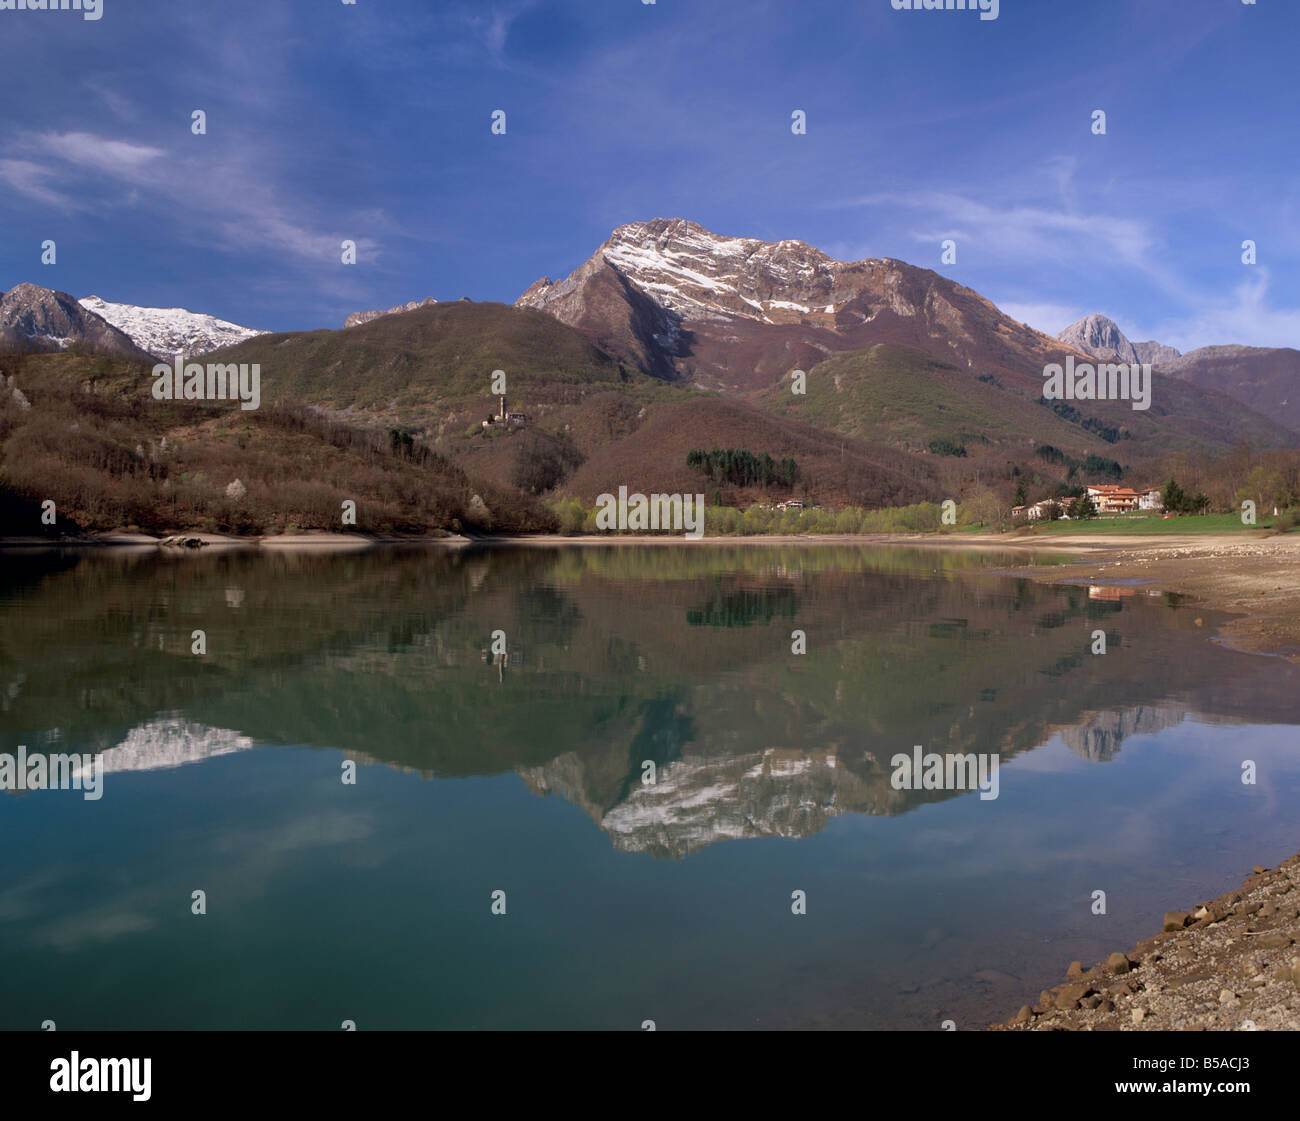 Lake of Gramolazzo, one of the highlights of the Parco Naturale delle Alpi Apuane, Apuane Alps (Garfagnana), Tuscany, Italy Stock Photo